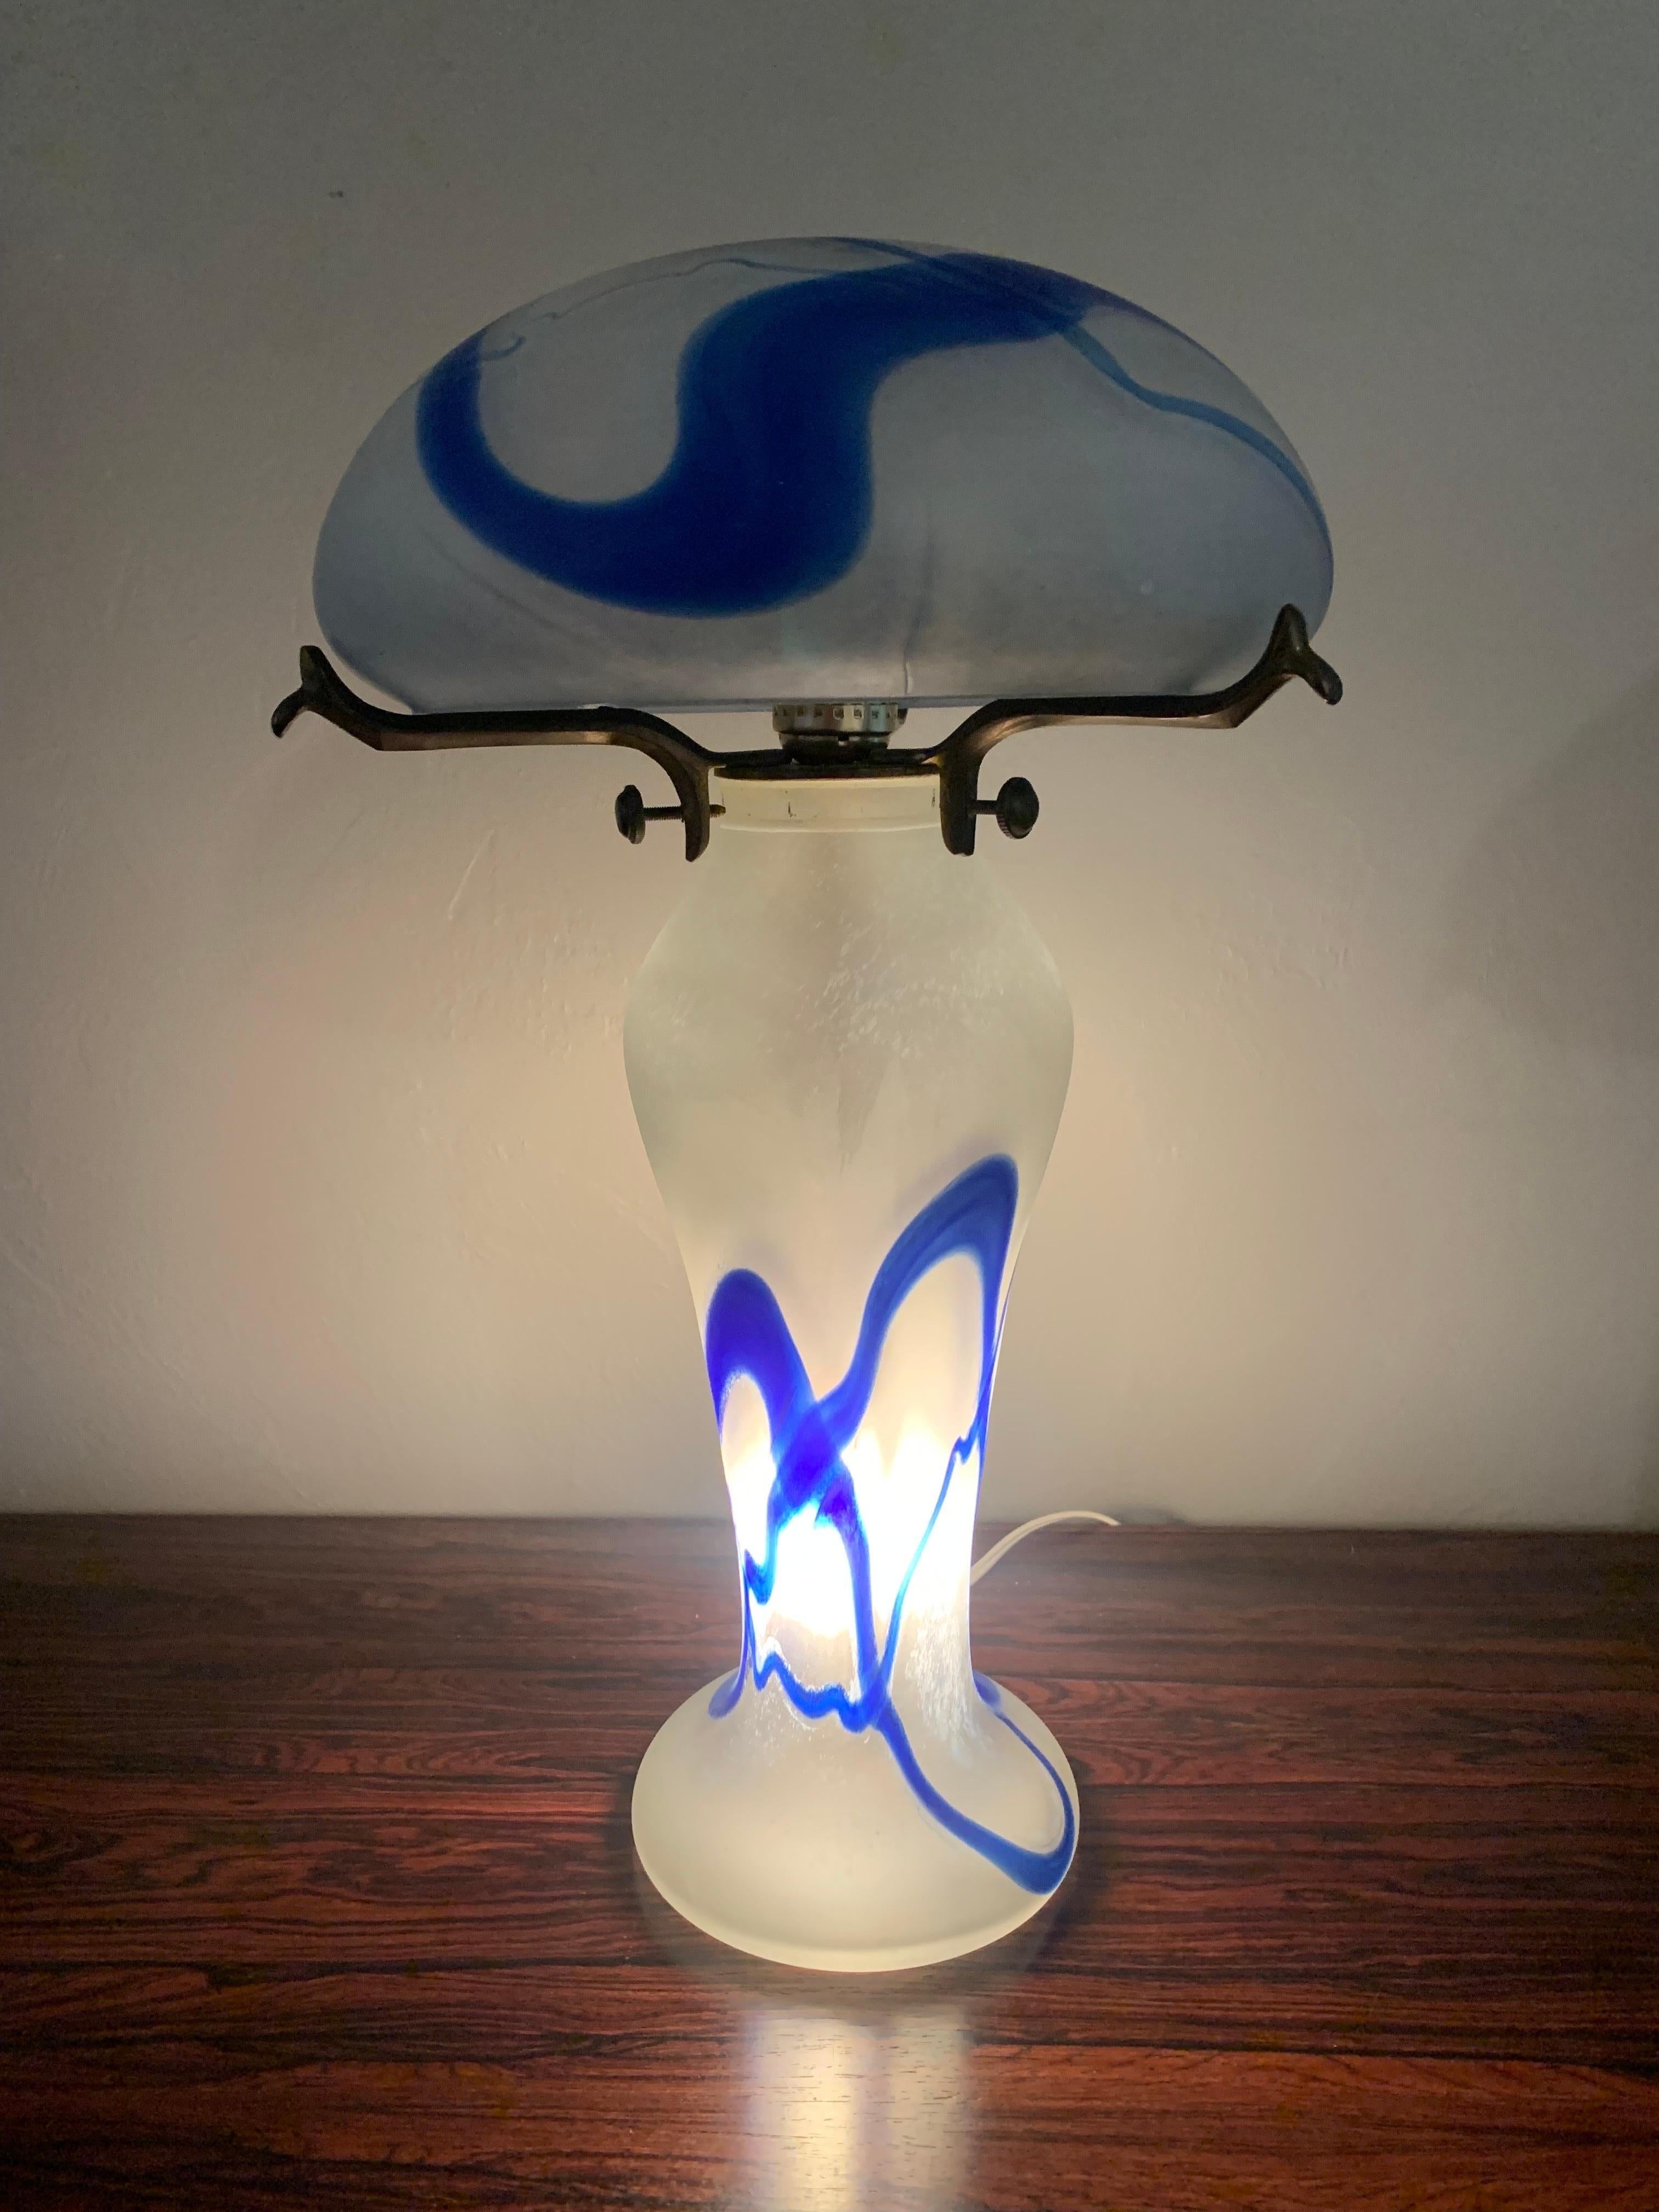 Exquisite Art Nouveau lamp made in France. 

Traditional mushroom shape with a rounded dome. Glass base and the two pieces all come together with a brass stem that attaches to the base. 

Blue, white and clear glass. 

Circa 1900s. 

There is a